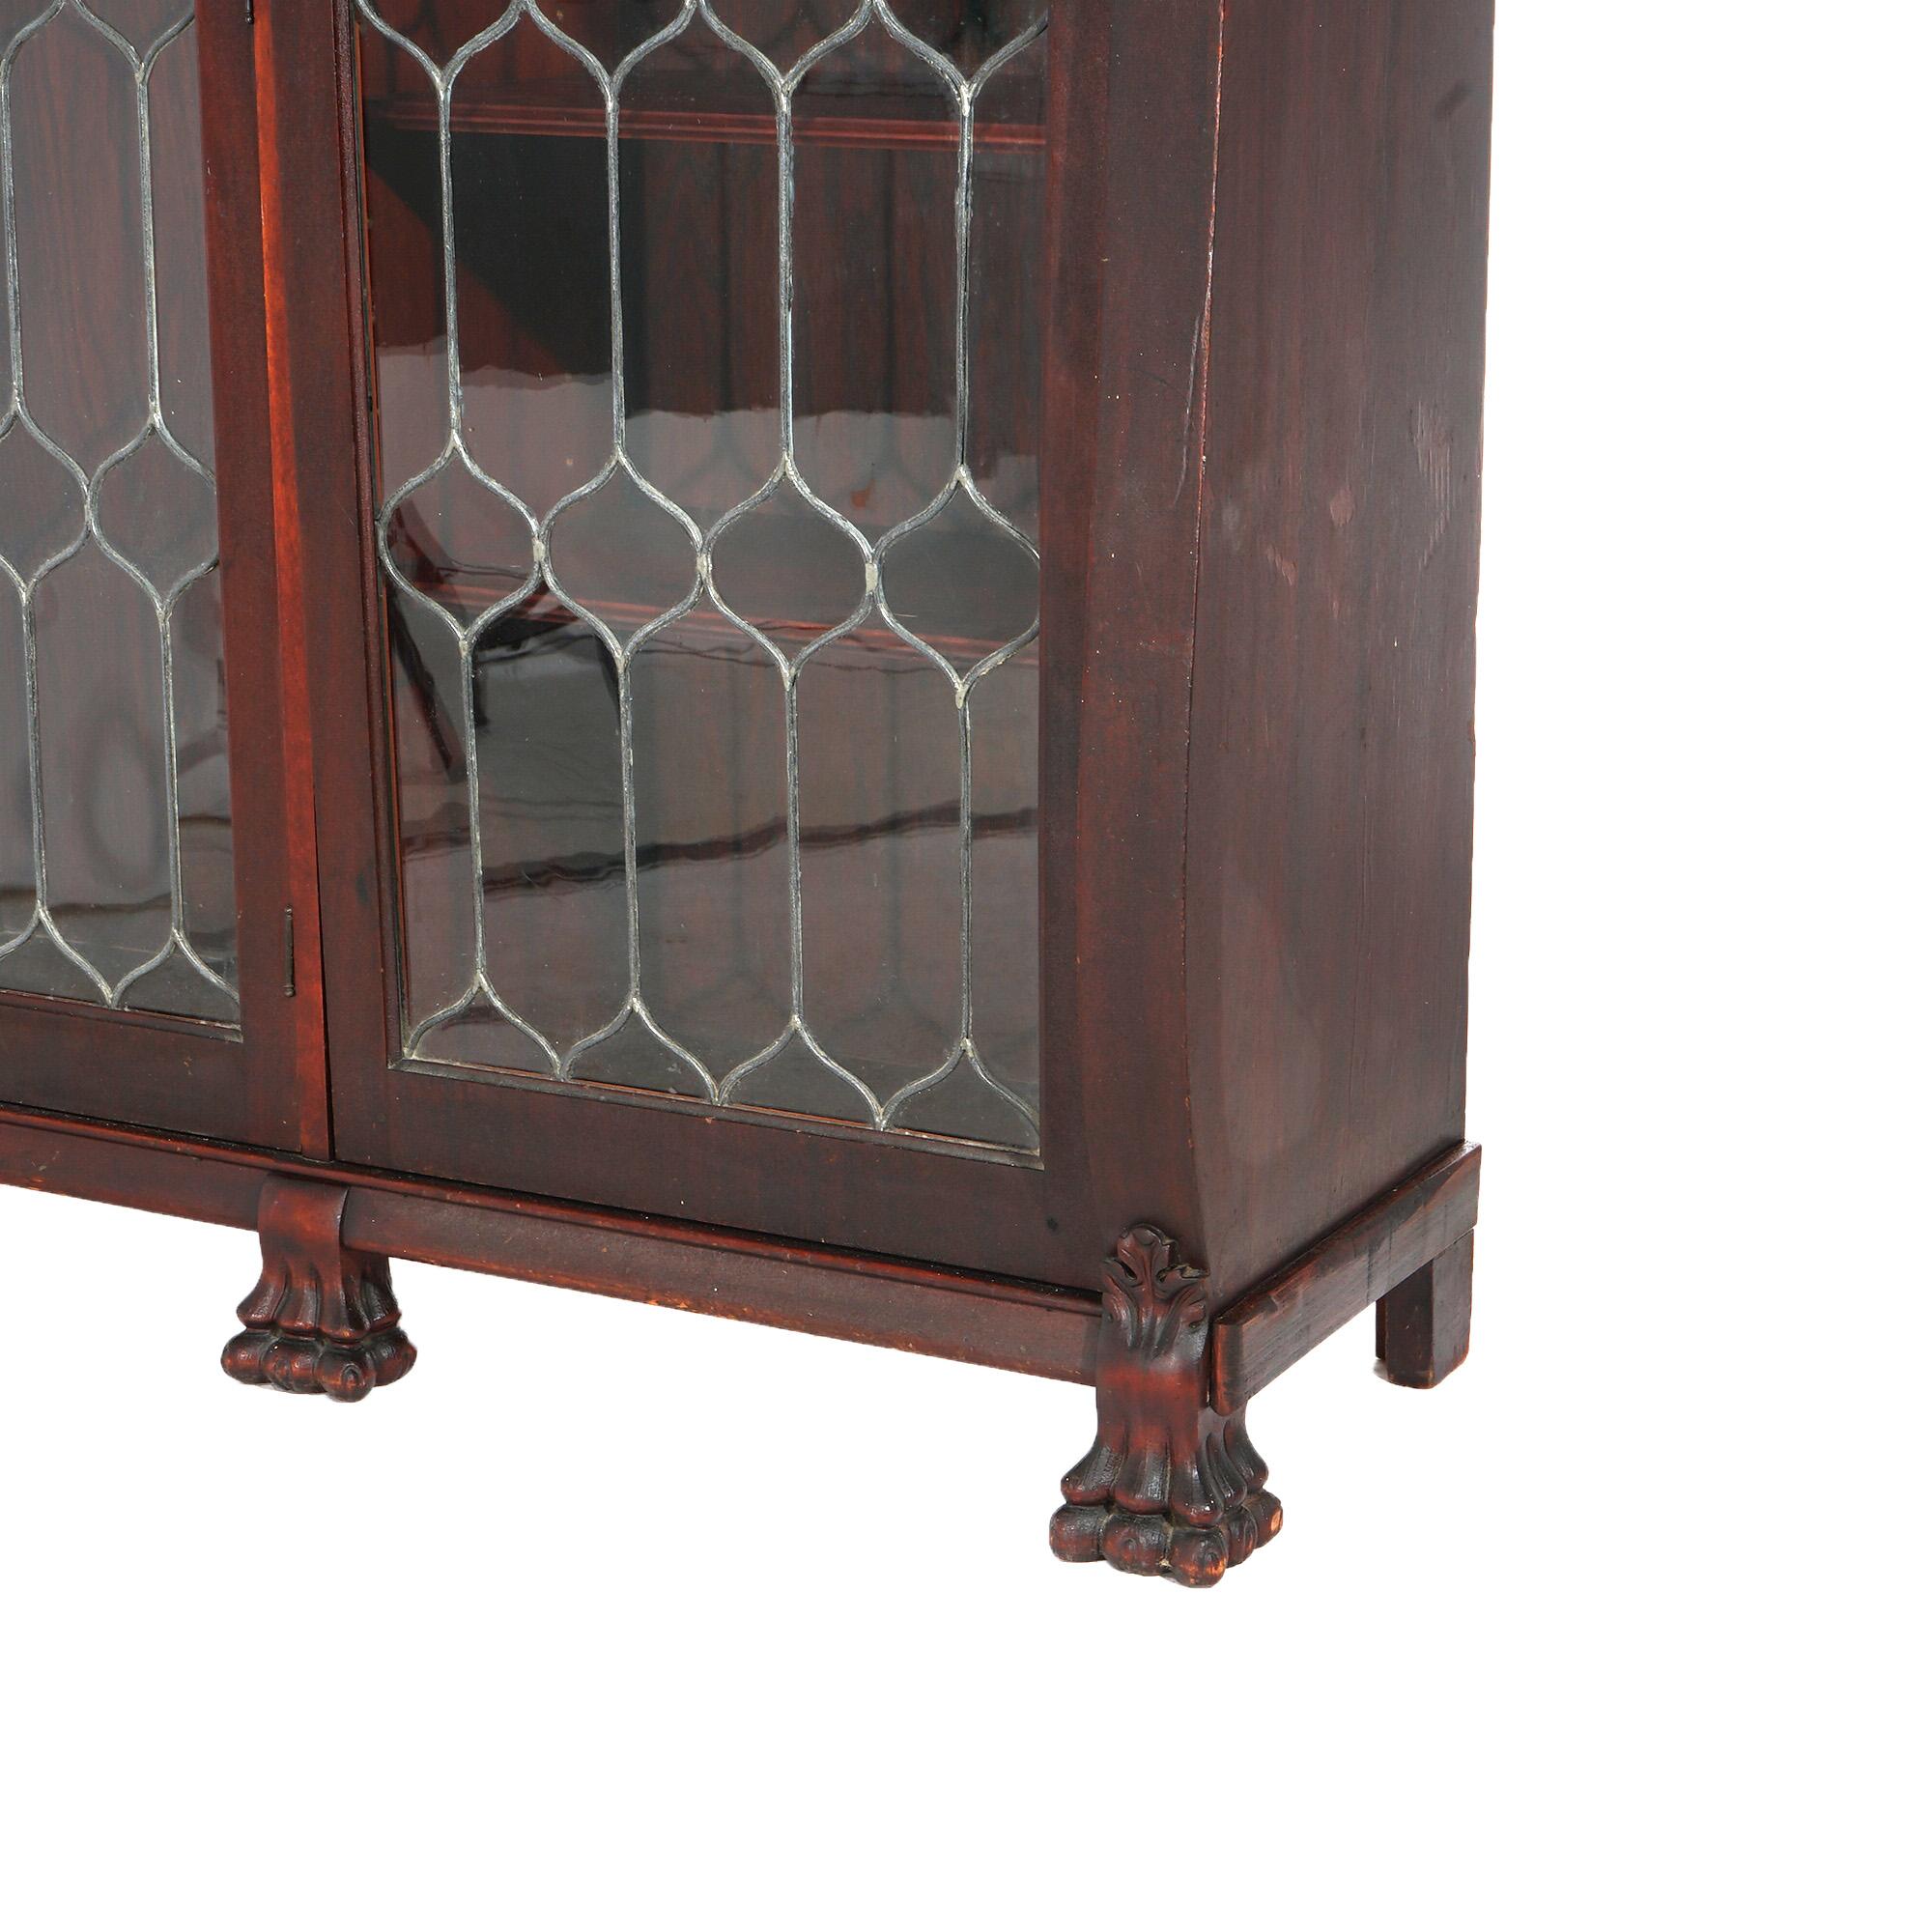 Antique Mahogany Triple Door Leaded Glass Bookcase with Carved Claw Feet C1900 For Sale 8